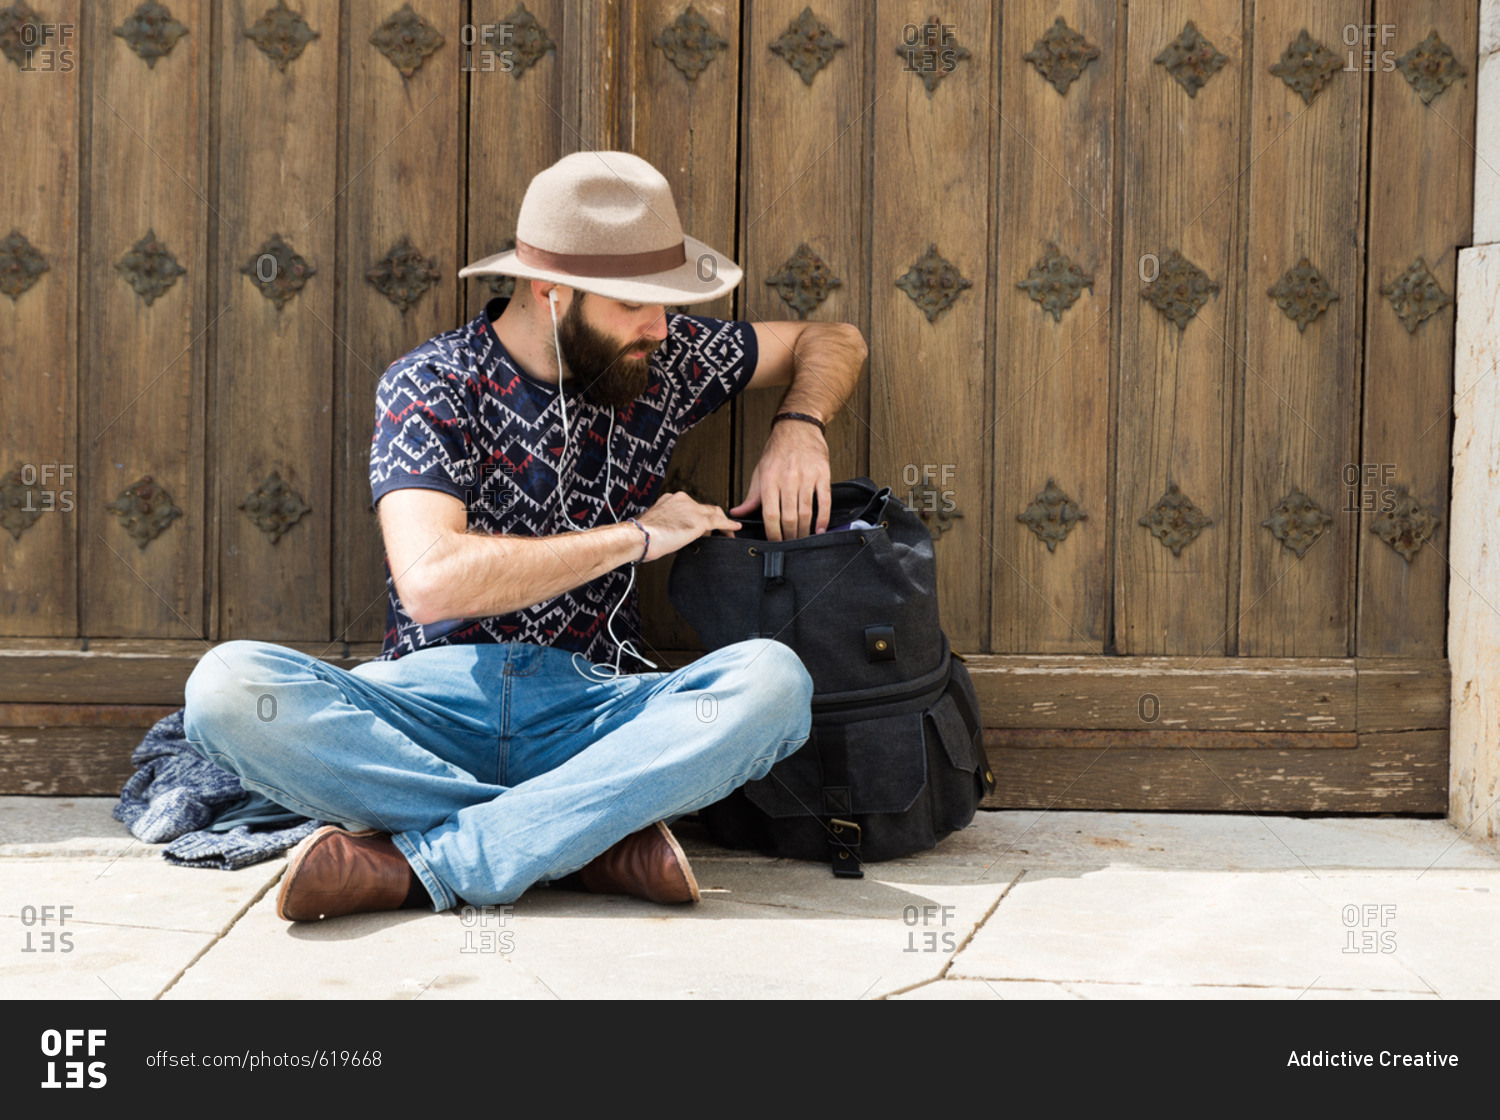 Horizontal outdoors shot of a man sitting on the ground and searching in a backpack while listening to music